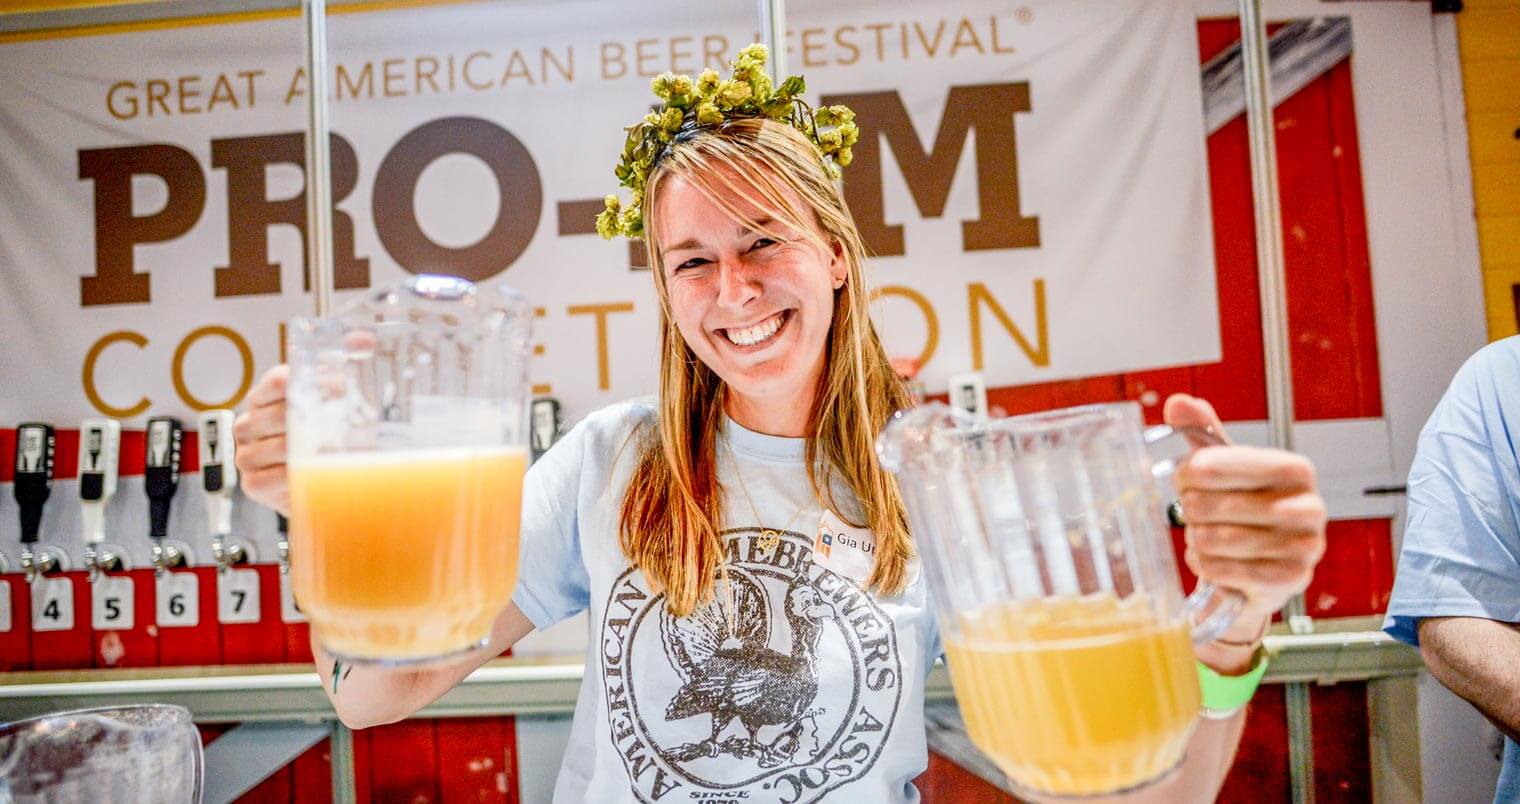 Great American Beer Festival, pretty smile holding pitchers, featured image